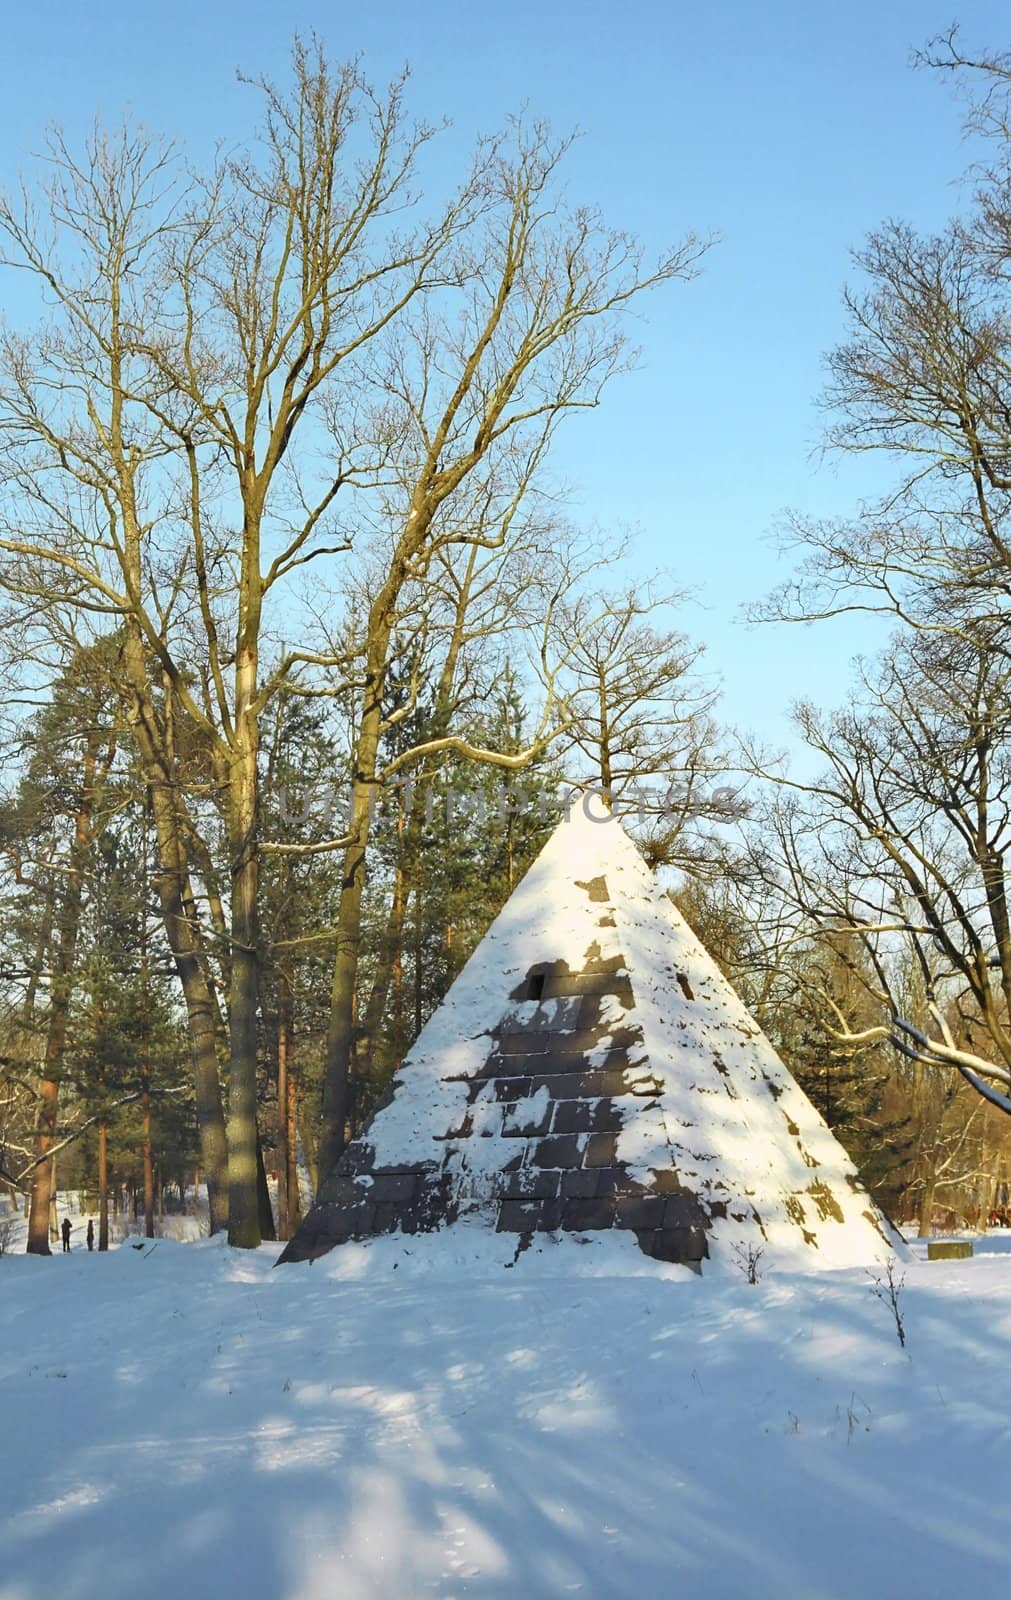 Pyramid in winter by mulden